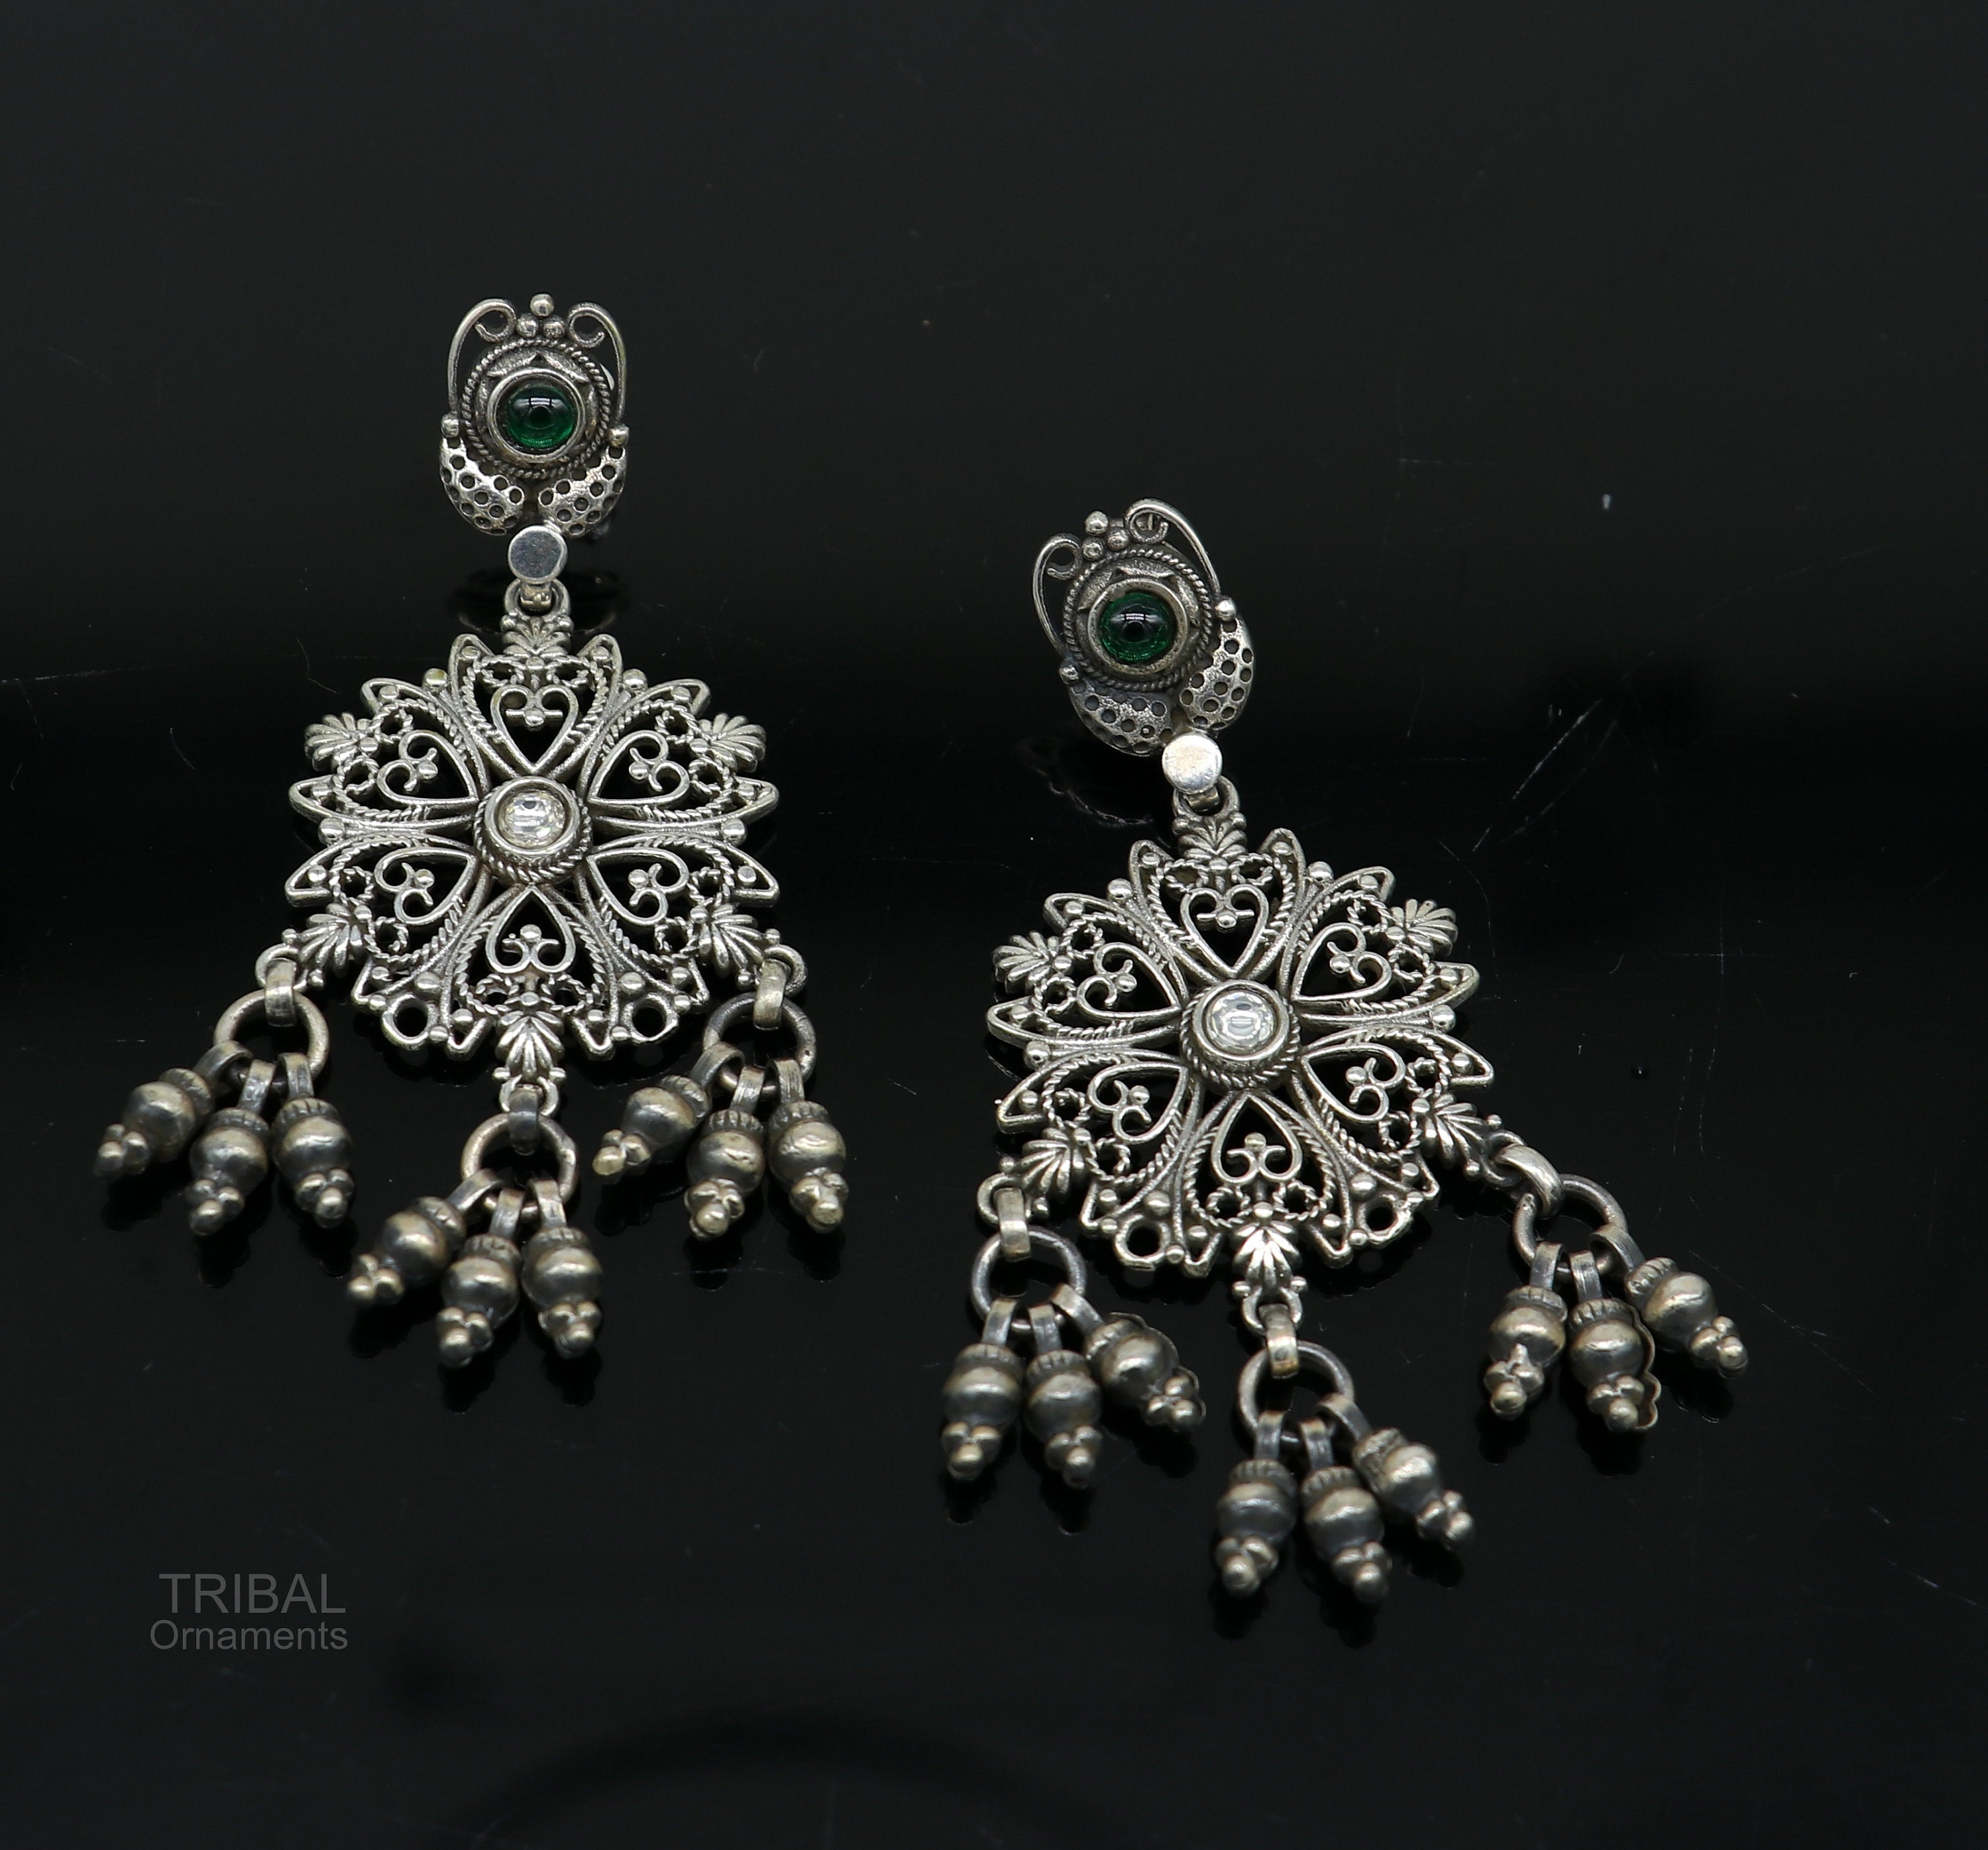 Stylish Silver Butterfly Diamond Butterfly Earrings With Sparkling Zircon  Perfect For Weddings, Parties, Banquets, And Gifts For Women From  Facaibaofu668_jewelry, $16.24 | DHgate.Com